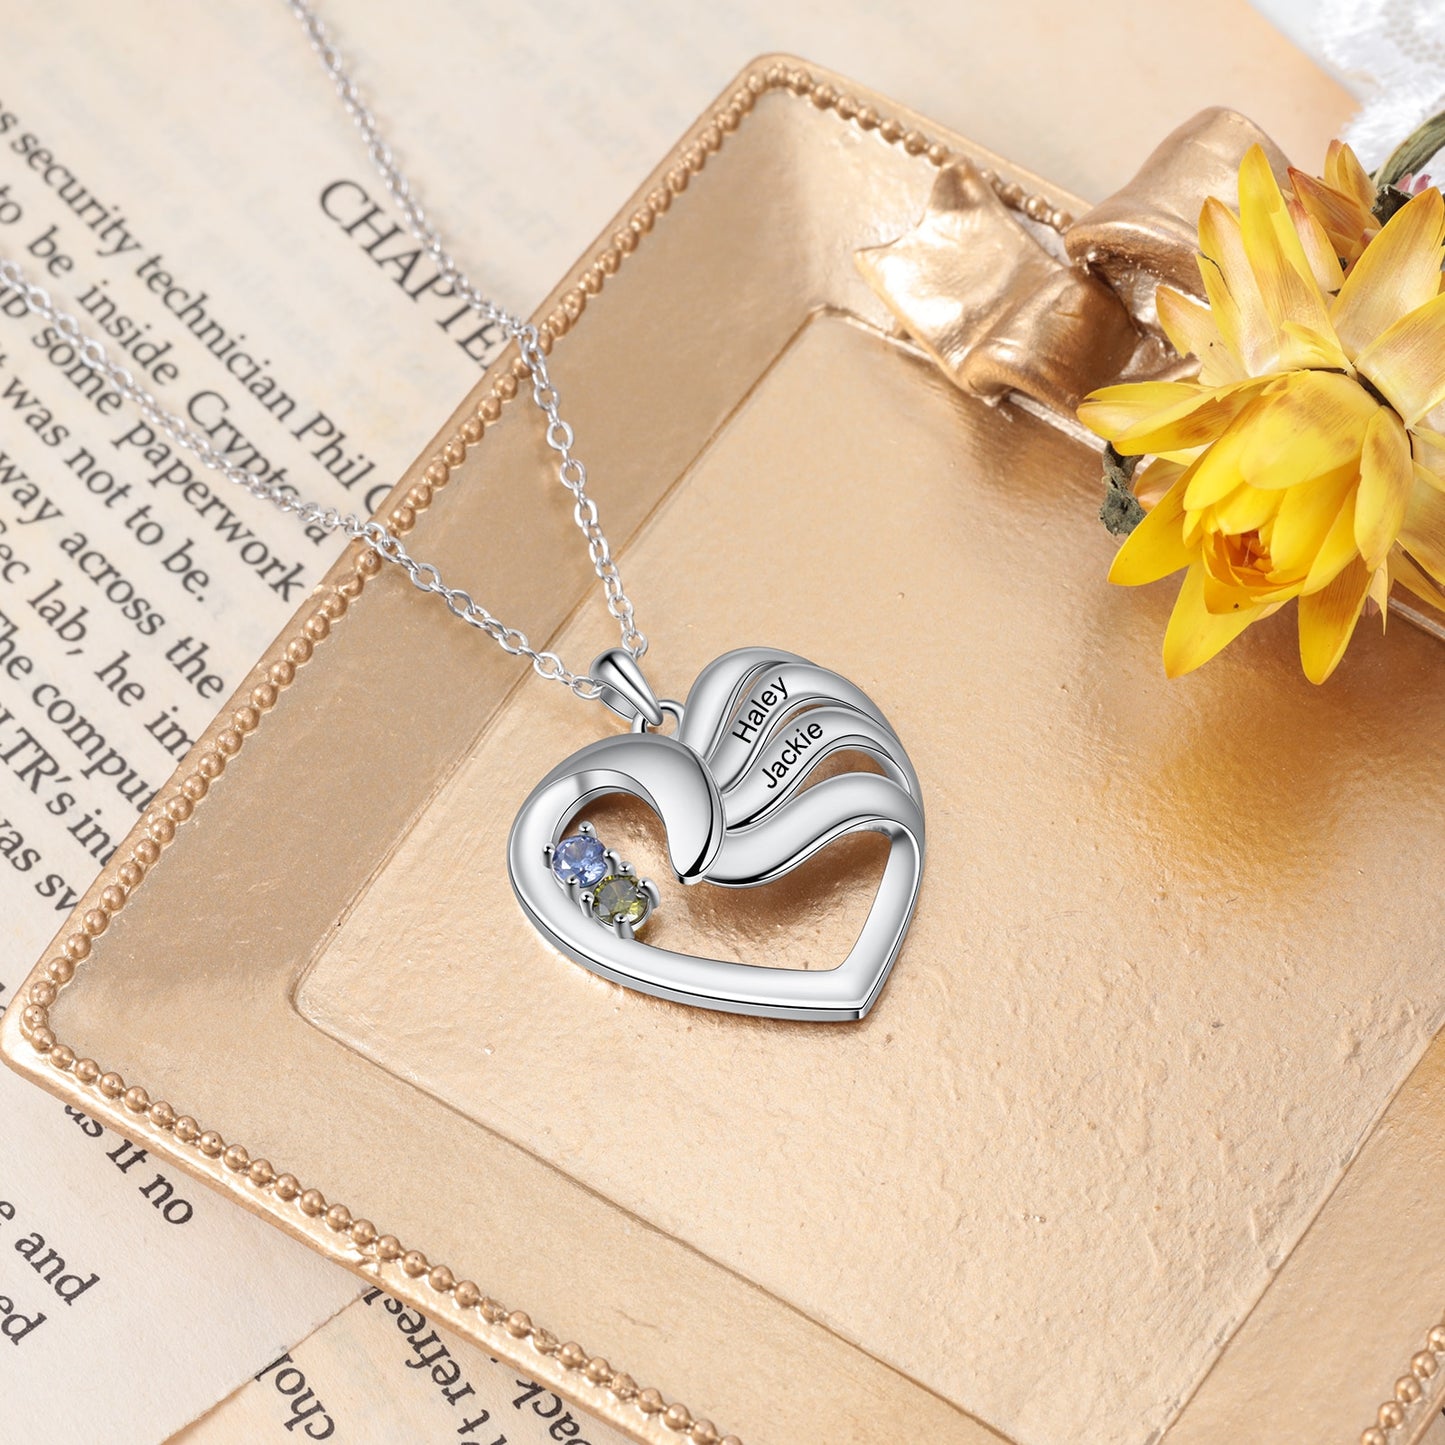 Personalized Heart Necklace with 2-5 Names and Customized Birthstone